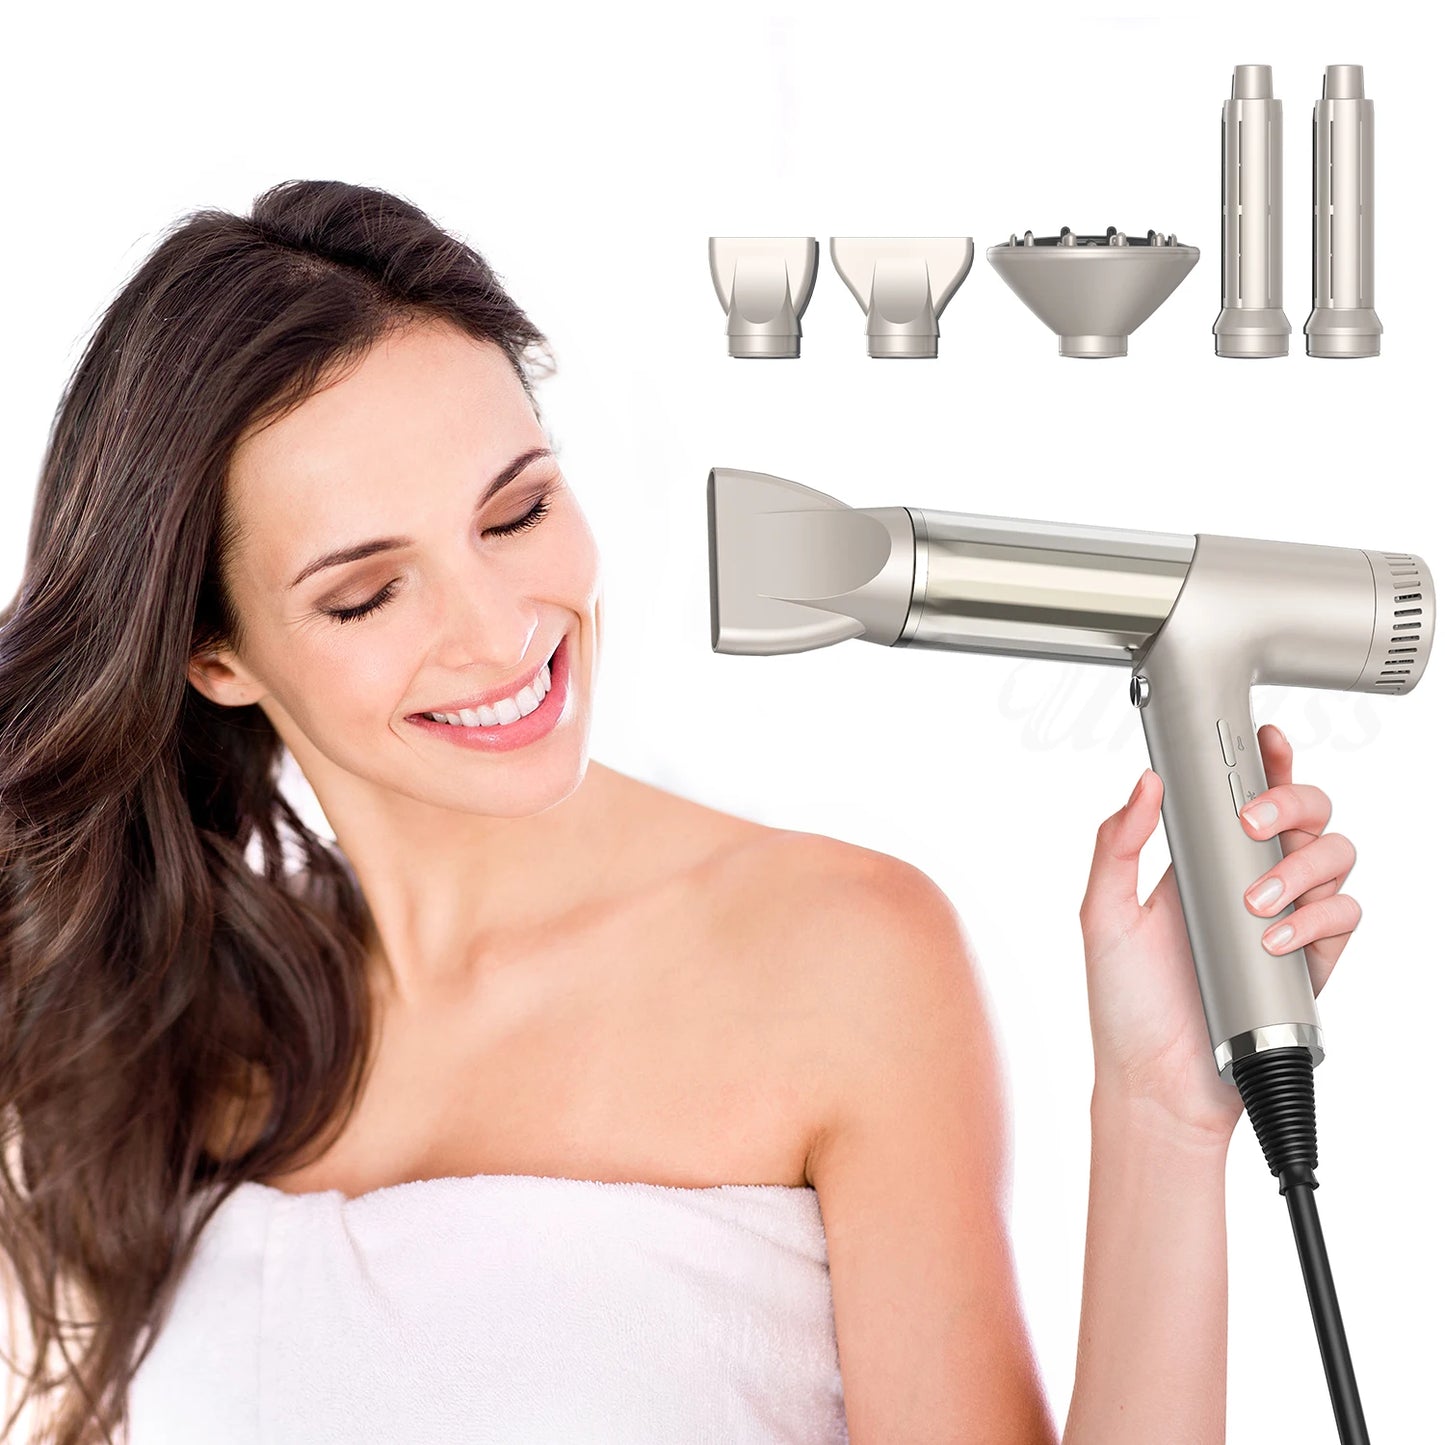 Professional Hair Dryer with Diffuser
Ionic Salon Blow Dryer
High Speed Styling Curling Iron
Powerful Wind Hairdryer